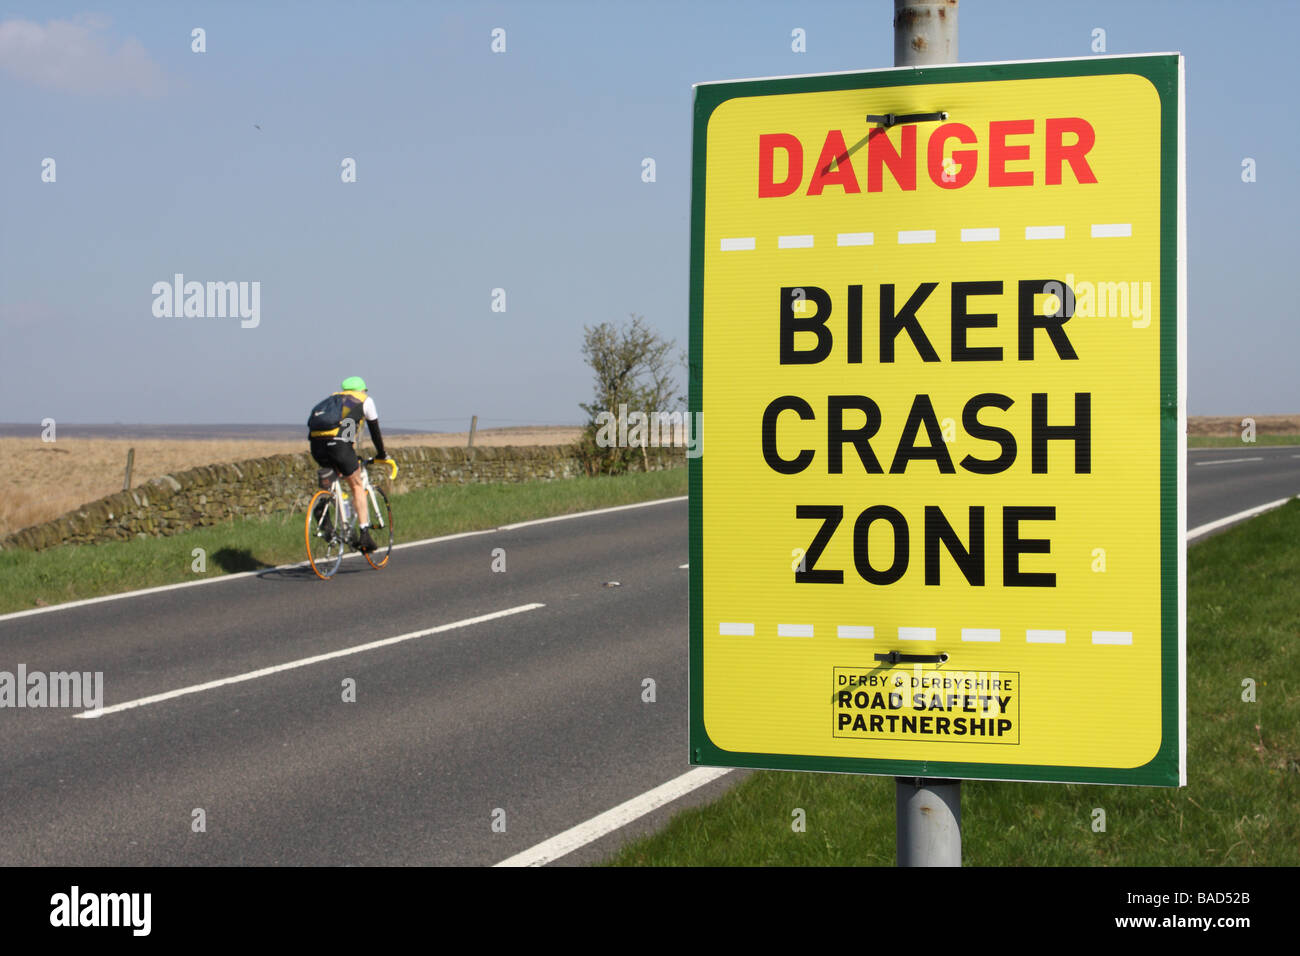 A roadside road safety awareness sign on a high casualty route. Stock Photo